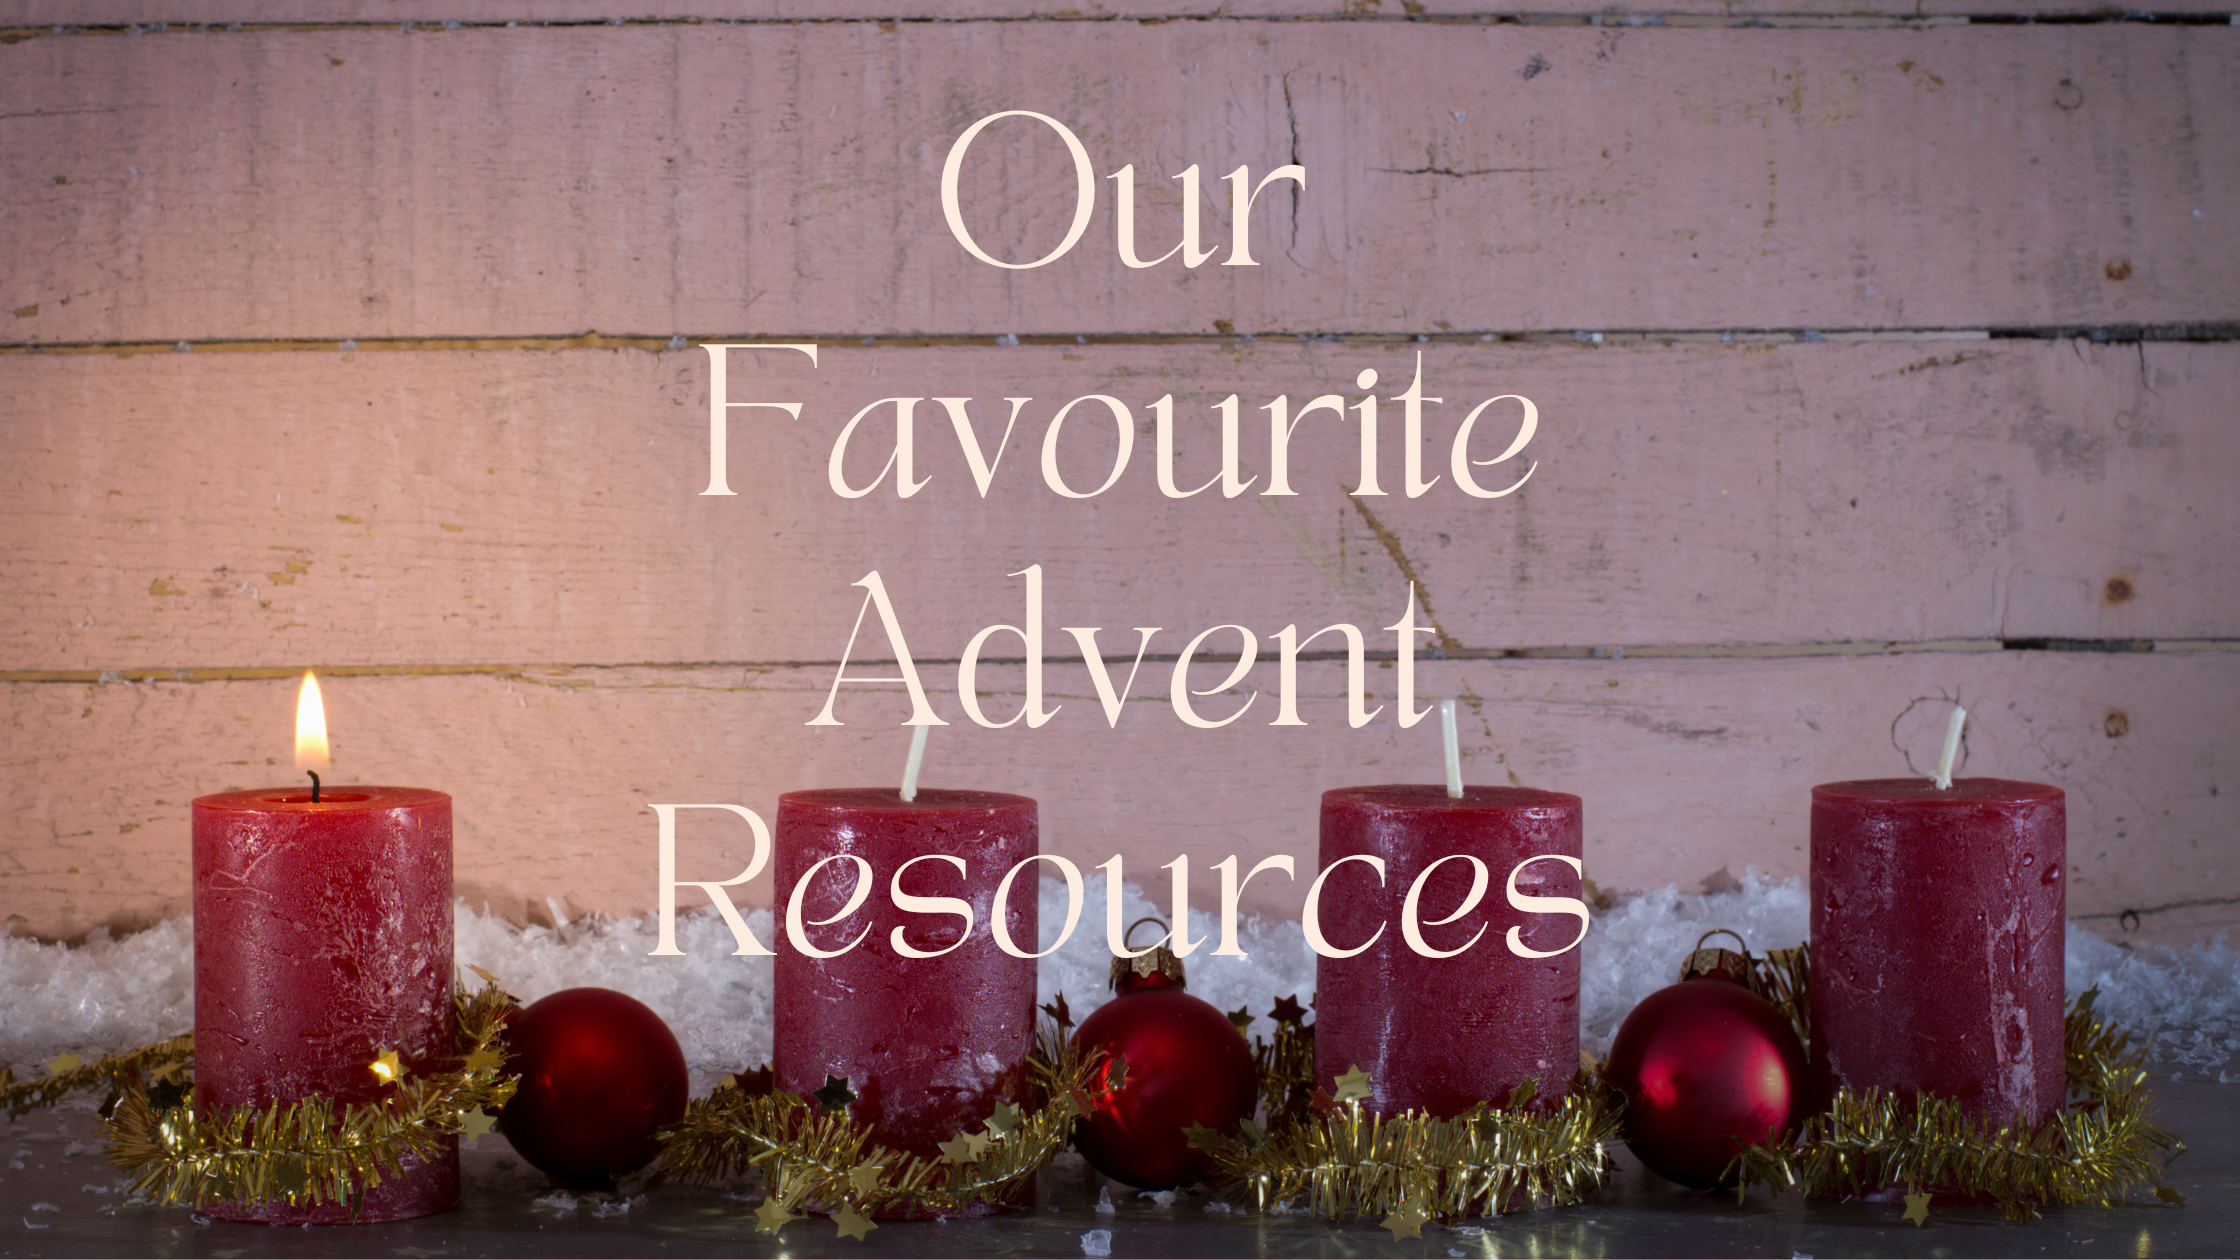 Our team favourite Advent resources